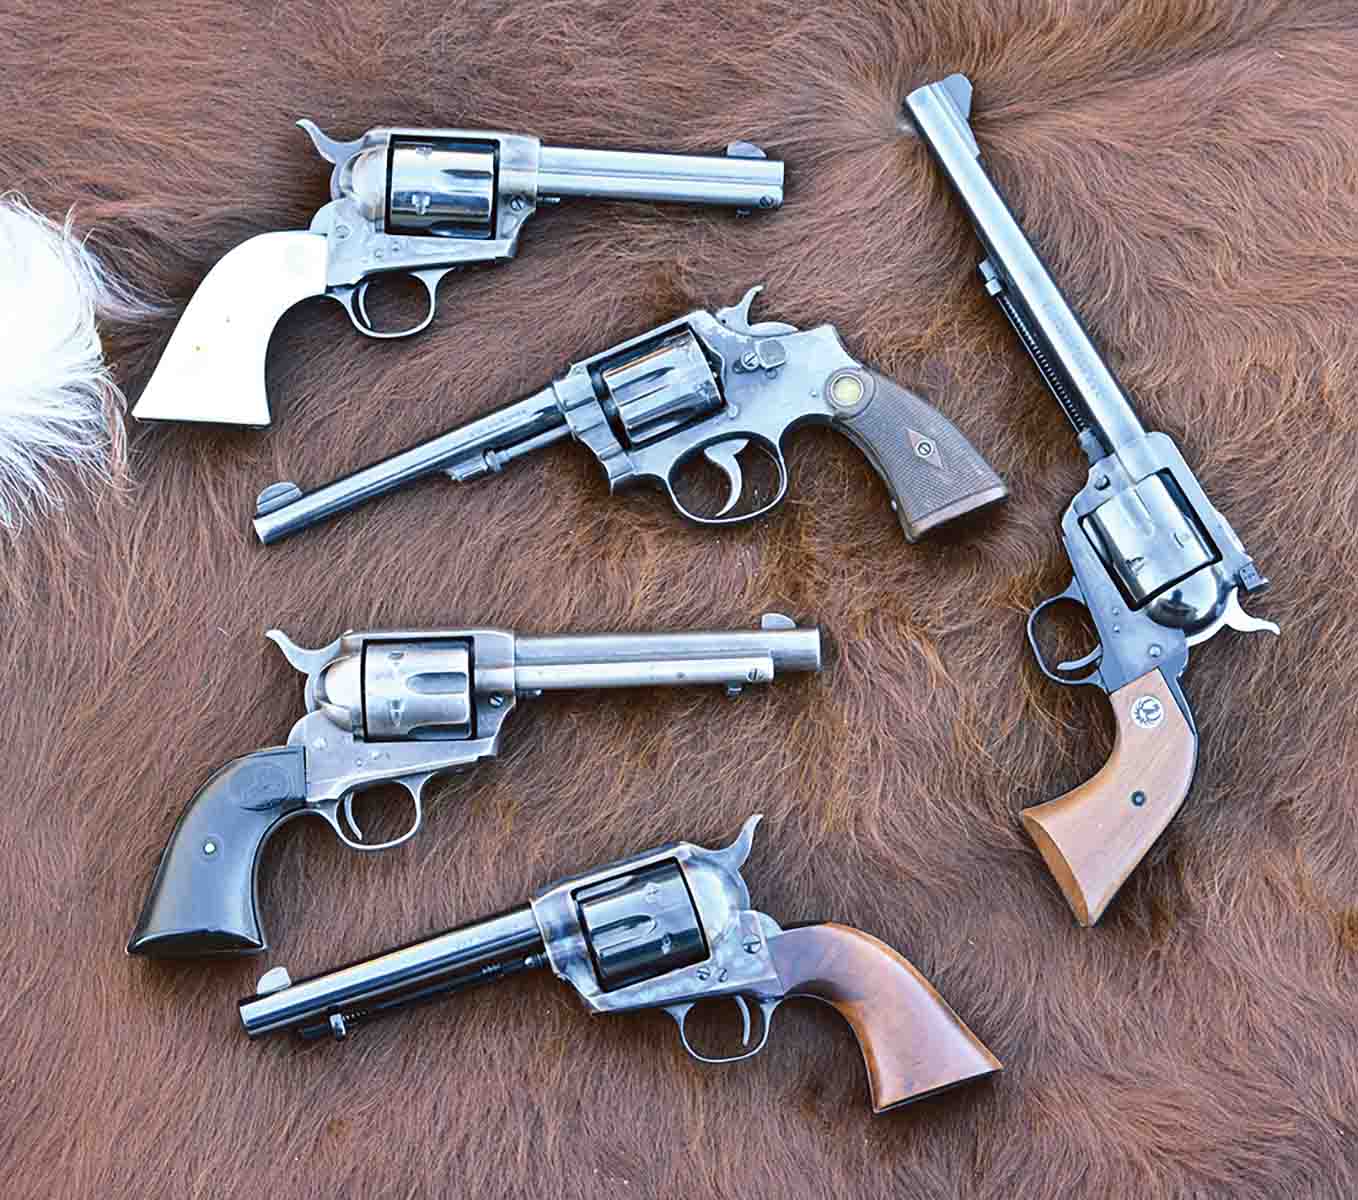 Examples of reference .32-20 sixguns include: (1) a pre-World War II Colt Single Action Army, (2) a Smith & Wesson Hand Ejector K-frame, (3) a Colt Single Action Army shipped to the famous Arizona-based Copper Queen Mine, (4) a USFA SAA pattern with a rare dual cylinder chambered in .327 Federal Magnum and (5) a custom Ruger Blackhawk (old model).